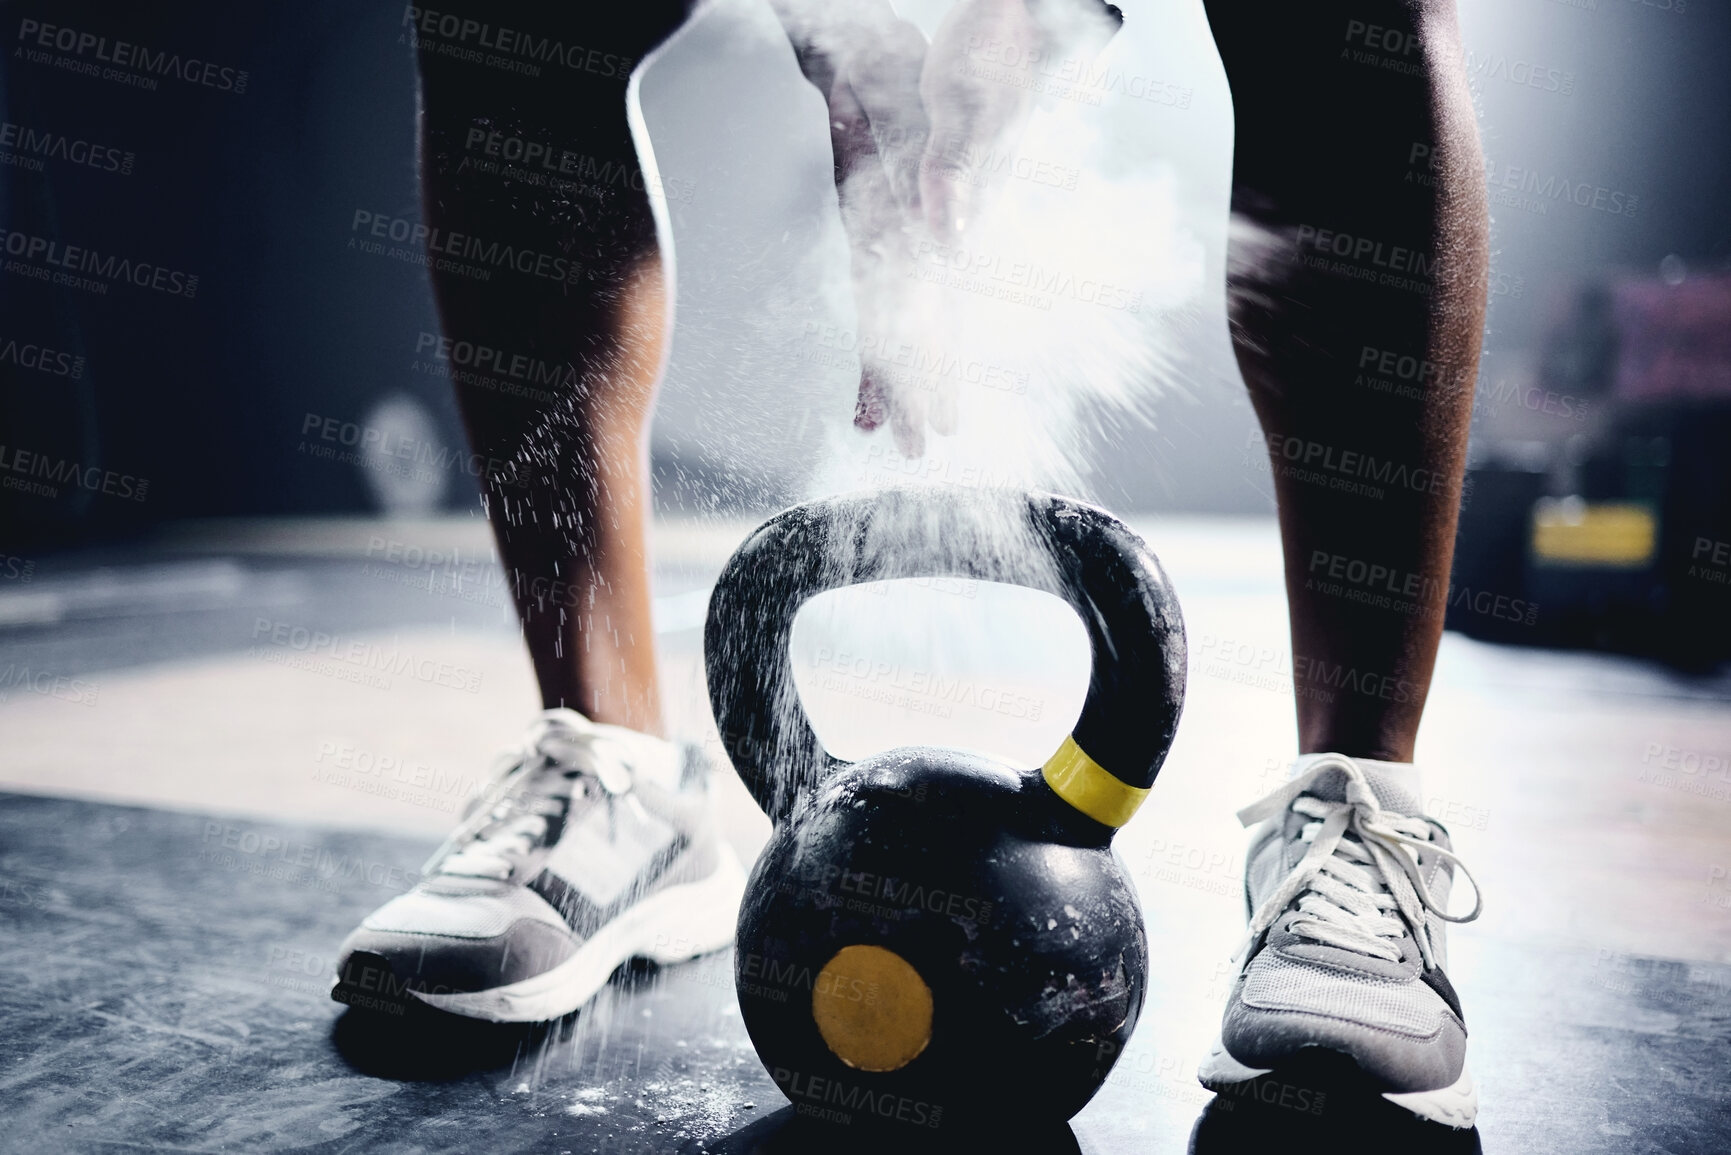 Buy stock photo Person, hand and kettlebell with powder at gym for strength training, grip and fitness challenge on floor. Athlete, bodybuilder and workout equipment for muscle exercise, power and chalk in body care